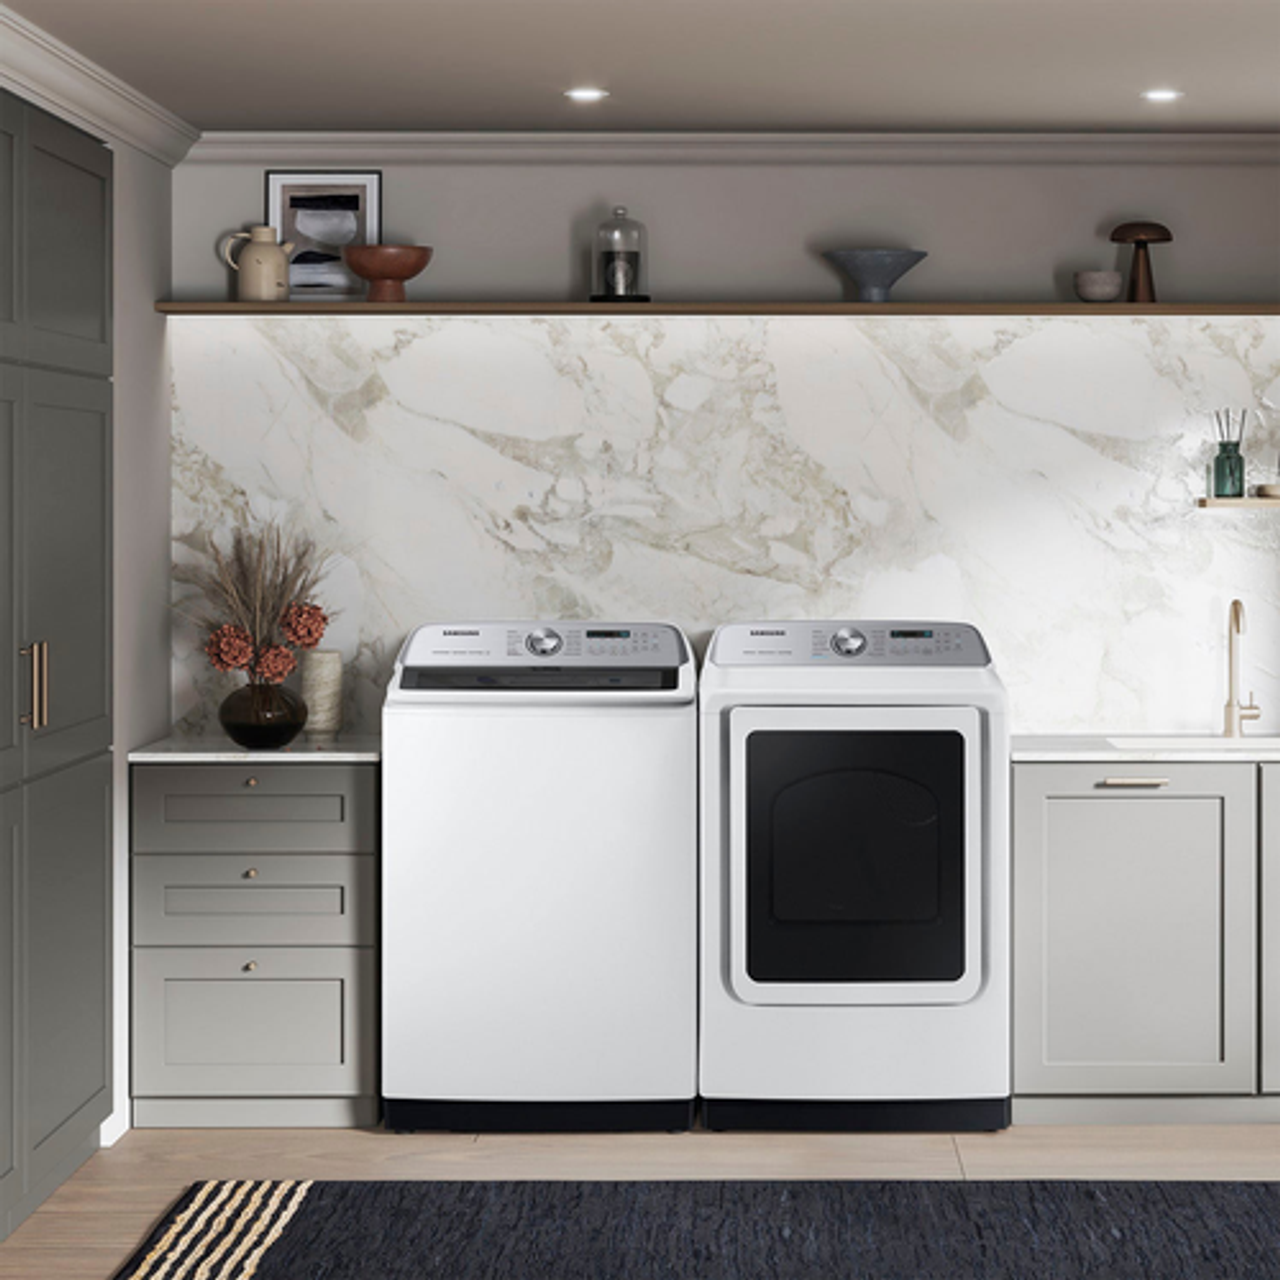 Samsung - 5.5 cu. ft. High-Efficiency Smart Top Load Washer with Super Speed Wash - White